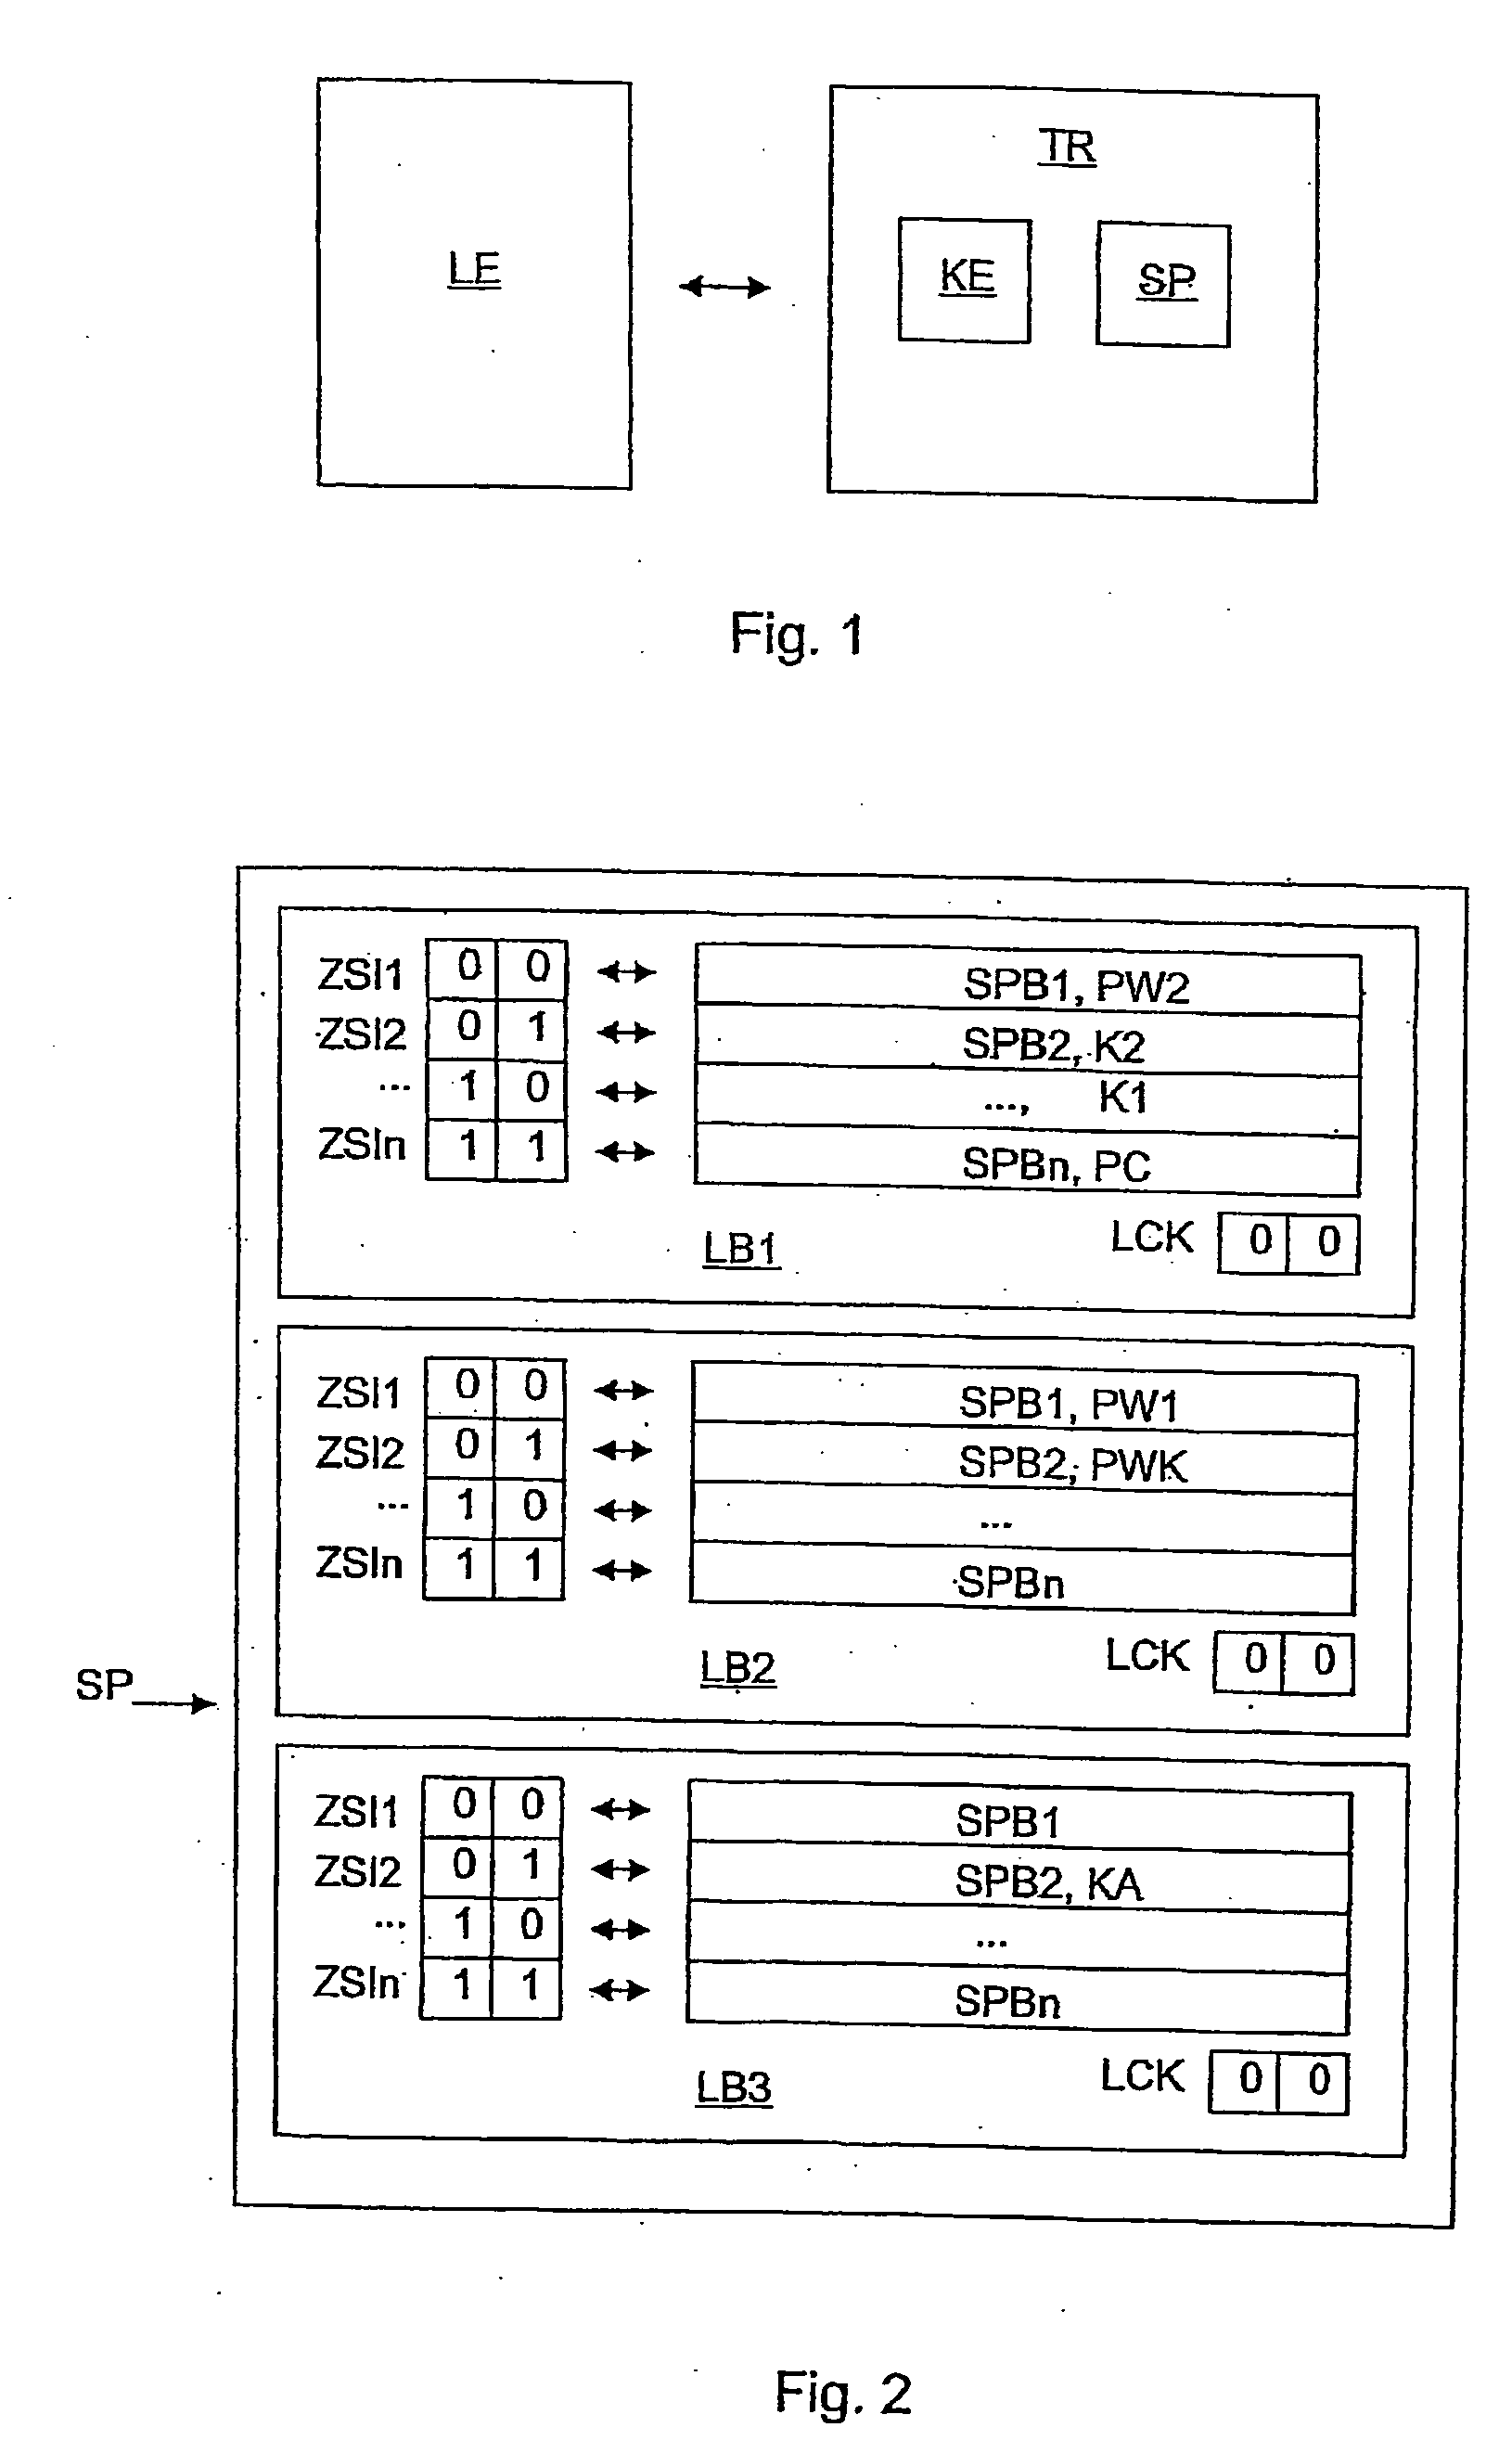 Method for access control